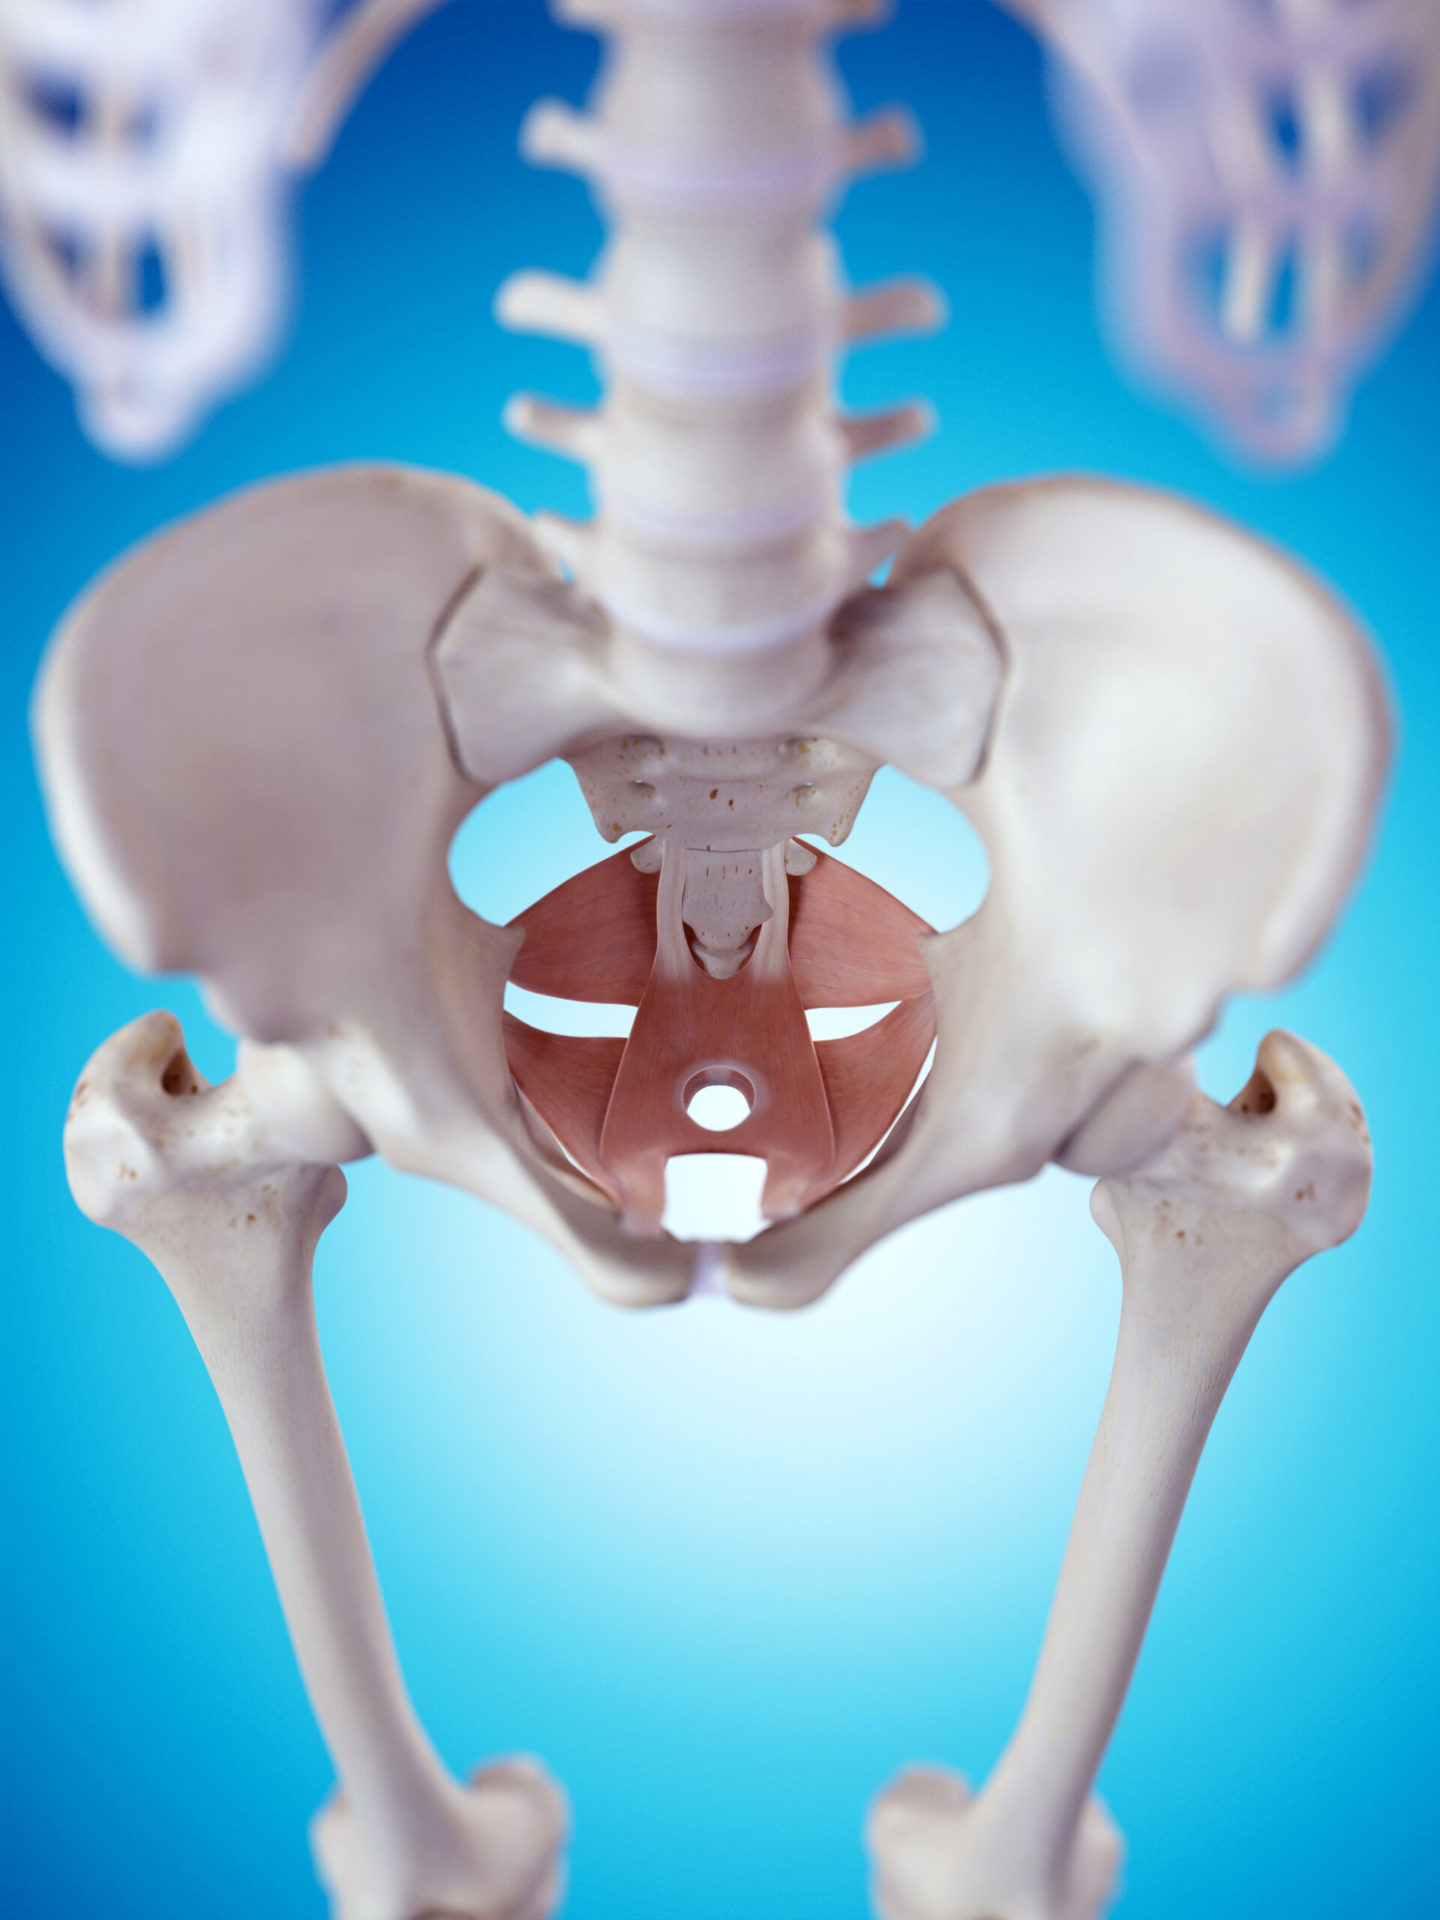 The Pelvic Floor: Where is it, What does it do and why is it important?